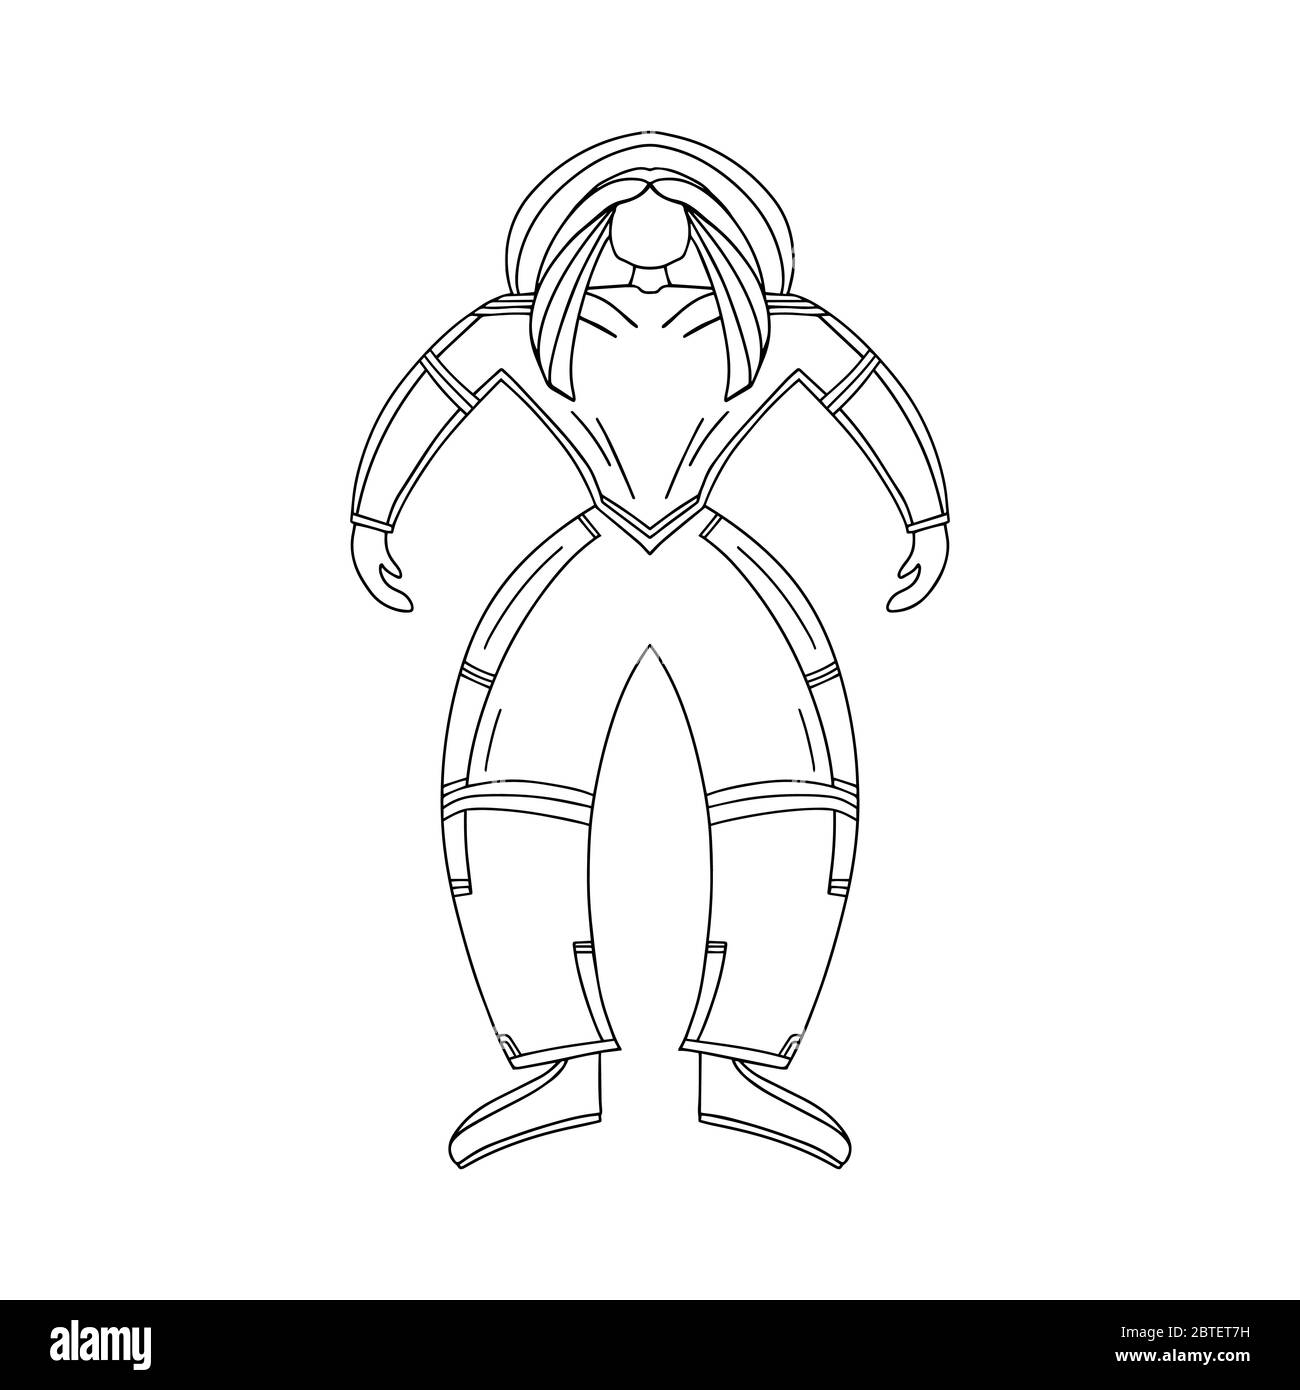 Cute hand drawn doodle woman astronaut. Isolated on white background. Vector stock illustration. Stock Vector